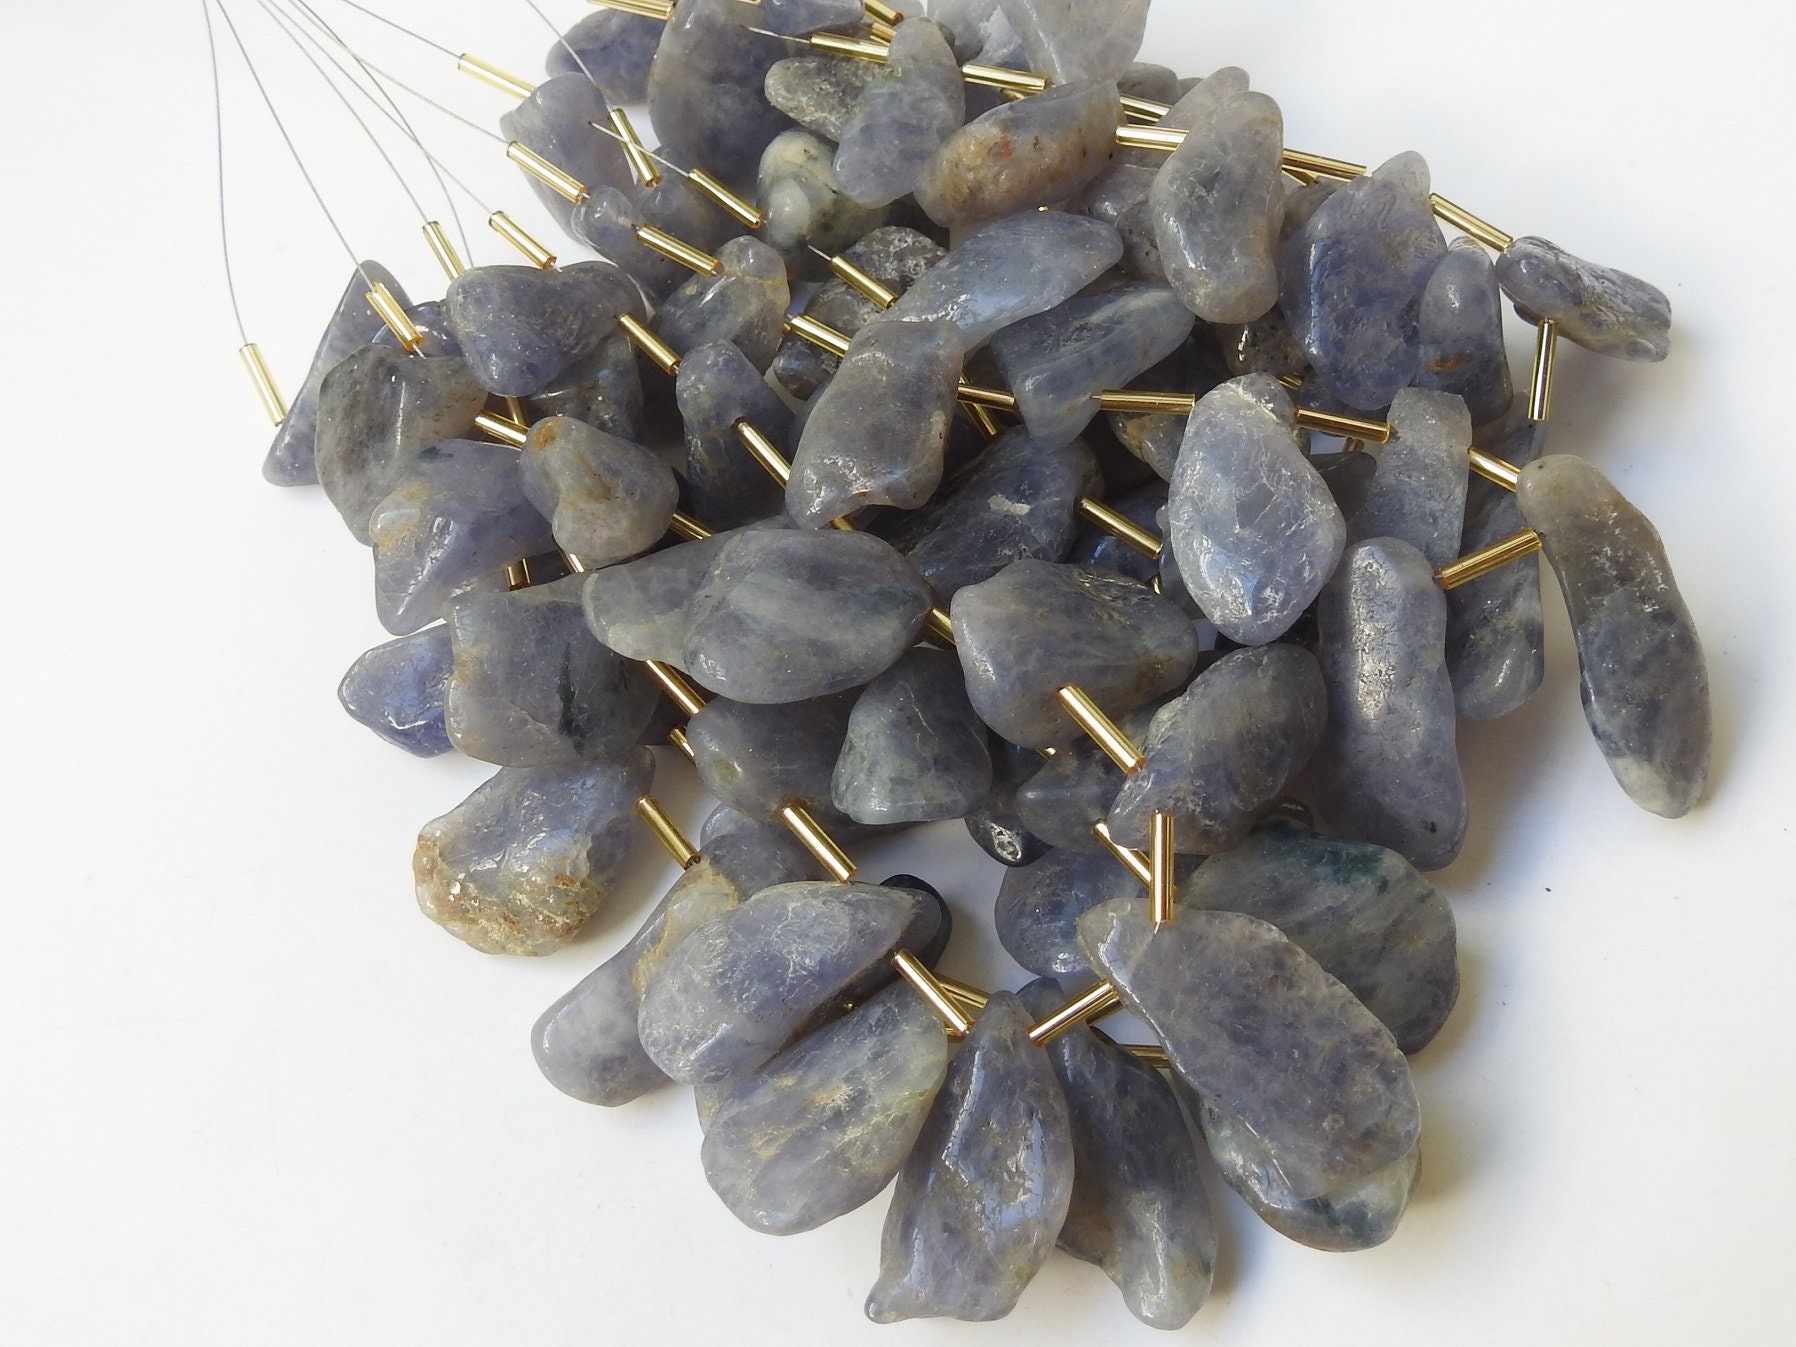 Iolite Rough Bead,Briolettes,Slab,Slice,Polished,Crystals,Minerals,Loose Raw 12Piece 28X18To22X14MM Approx Wholesaler,Supplies R5 | Save 33% - Rajasthan Living 15